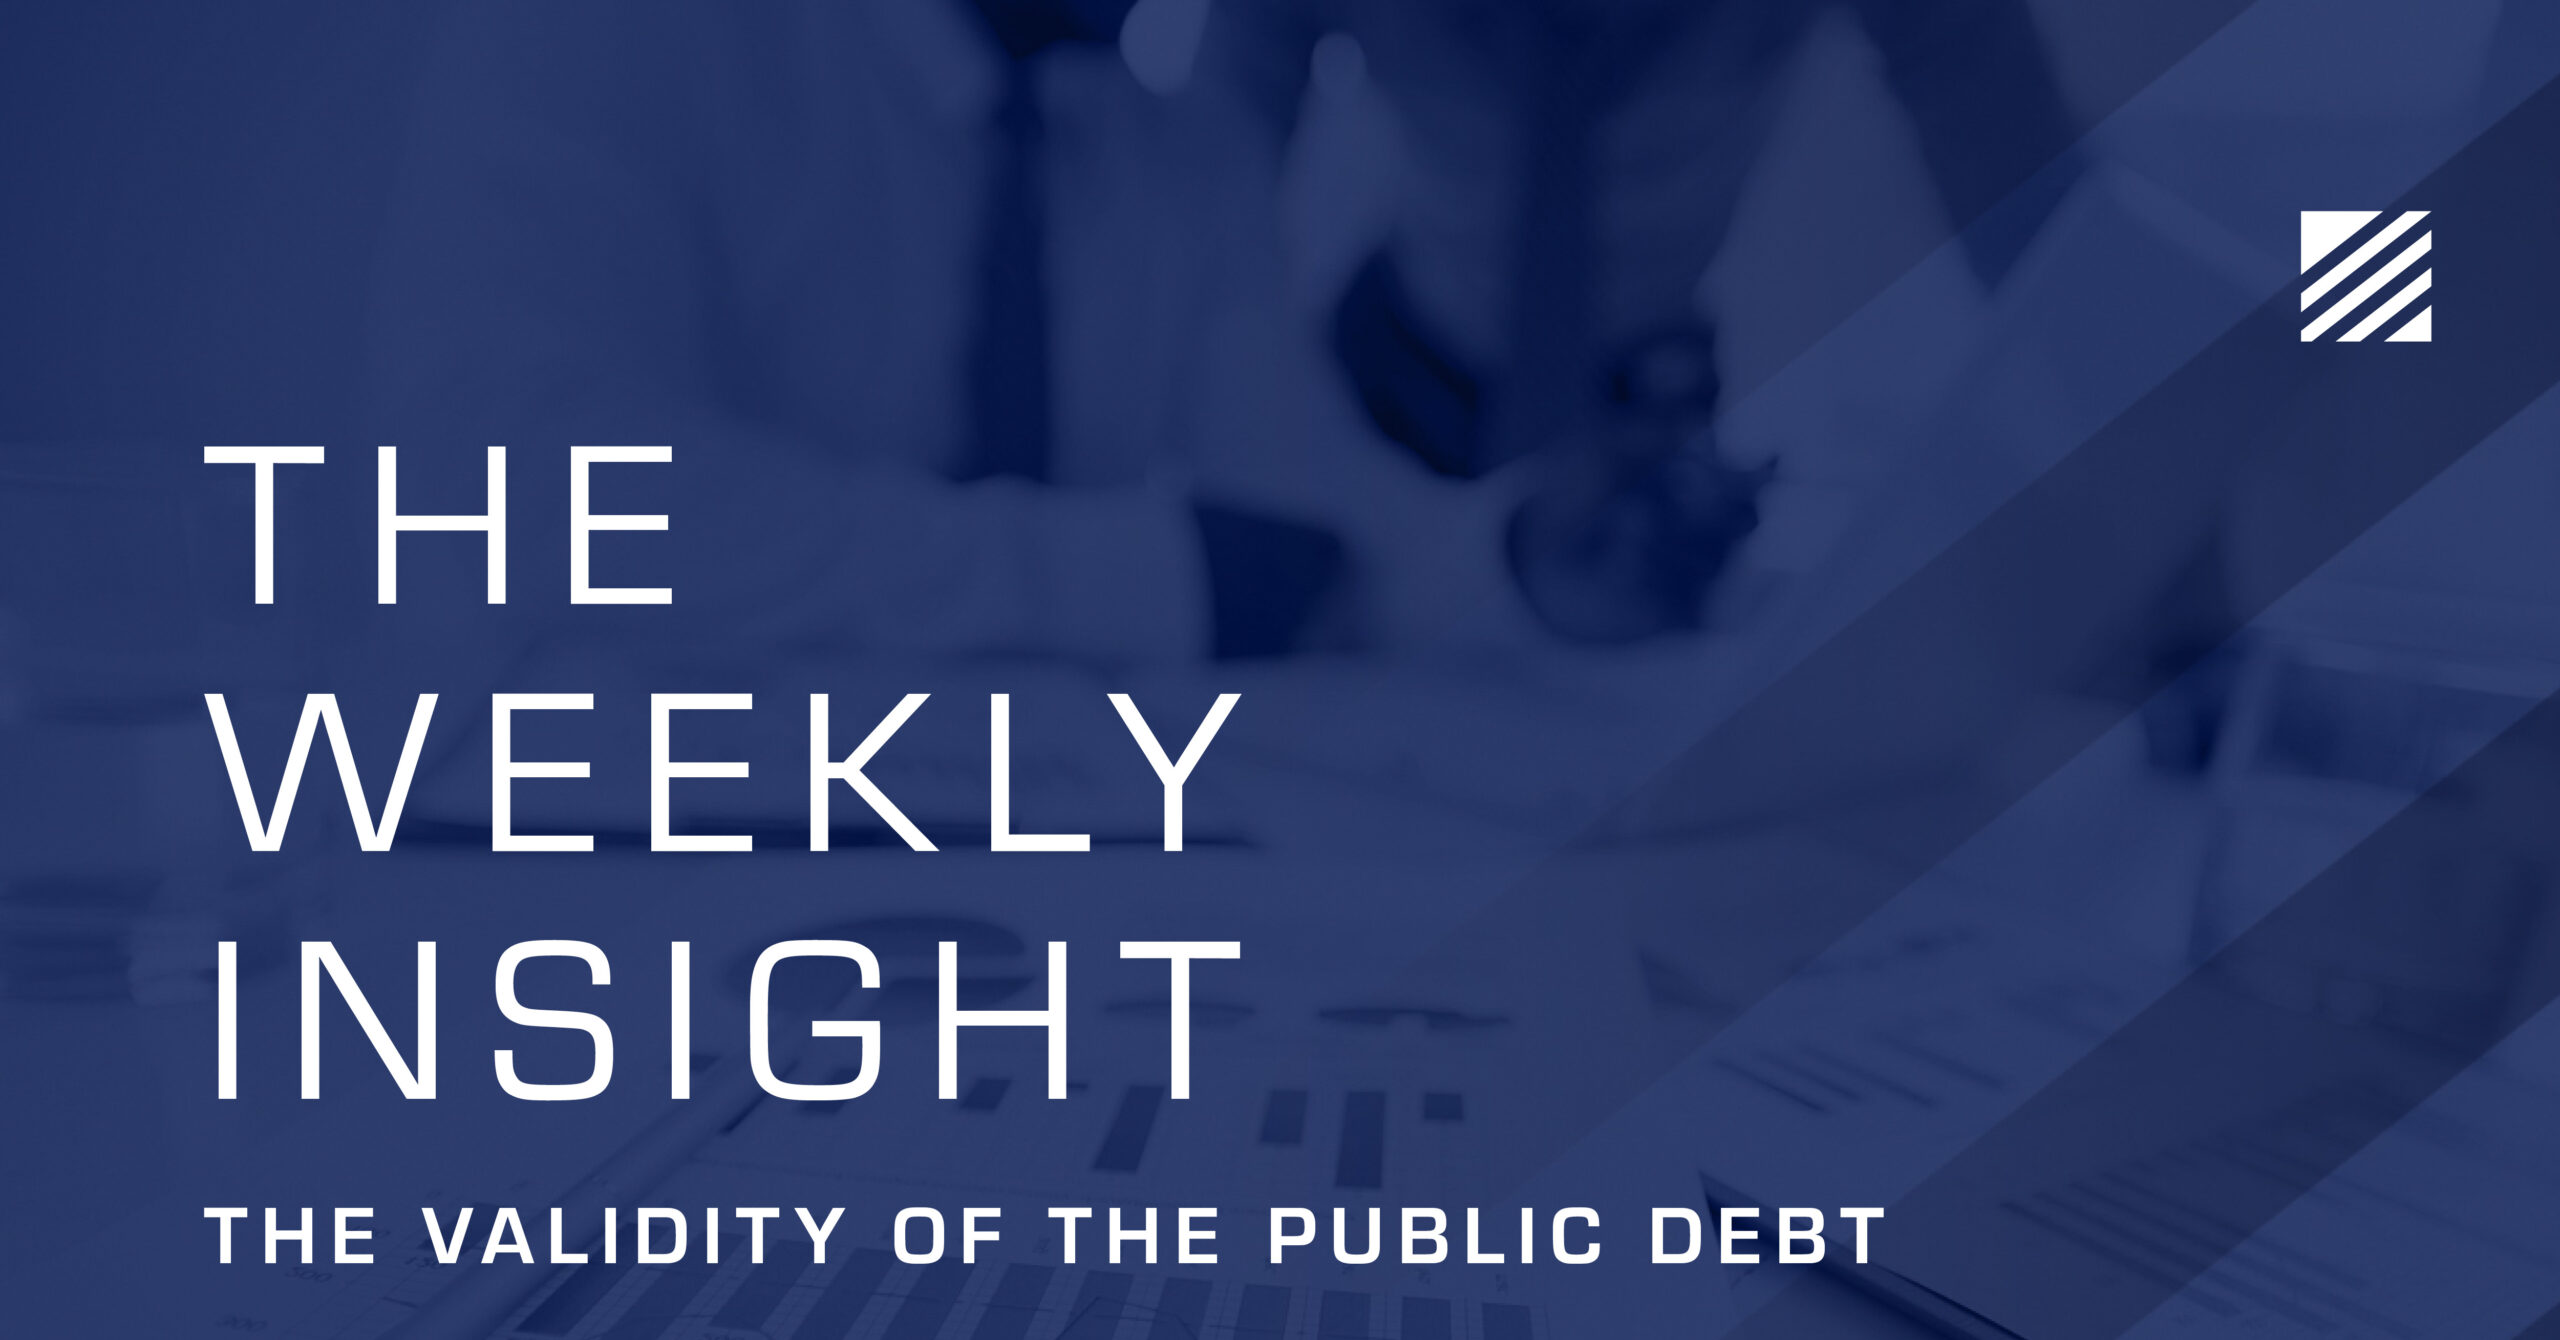 The Weekly Insight: The Validity of the Public Debt Graphic